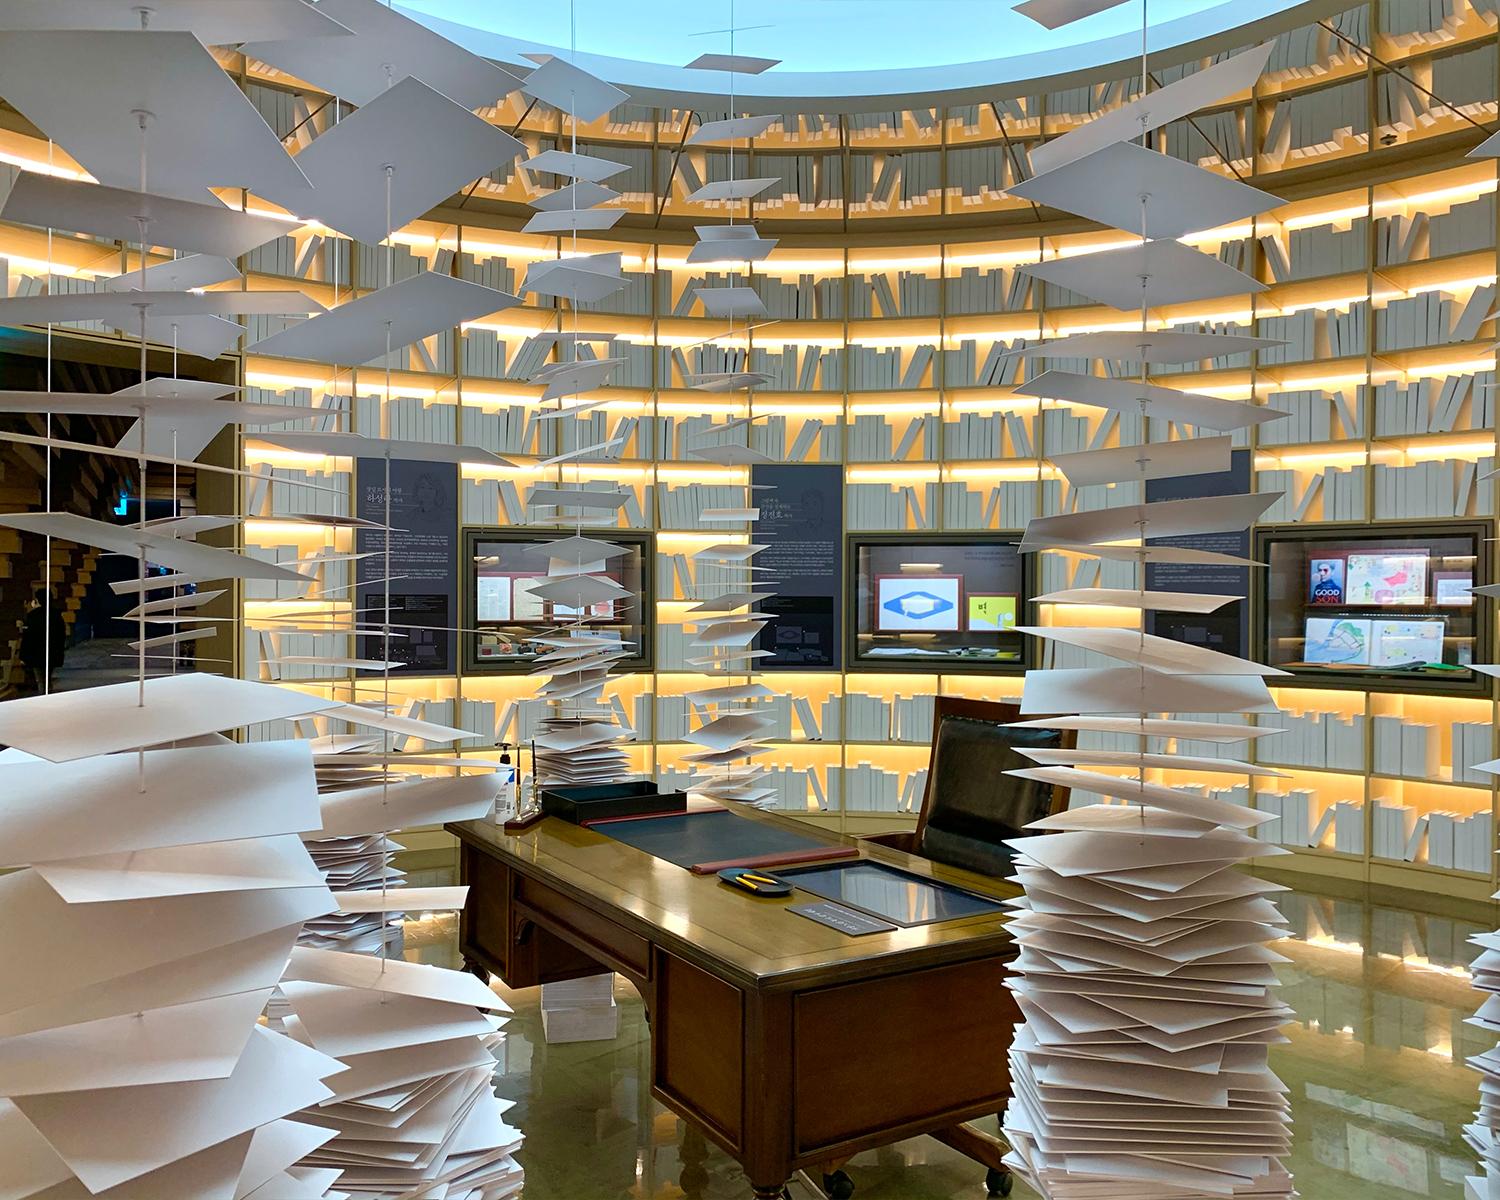 a book surrounded by loads of floating paper